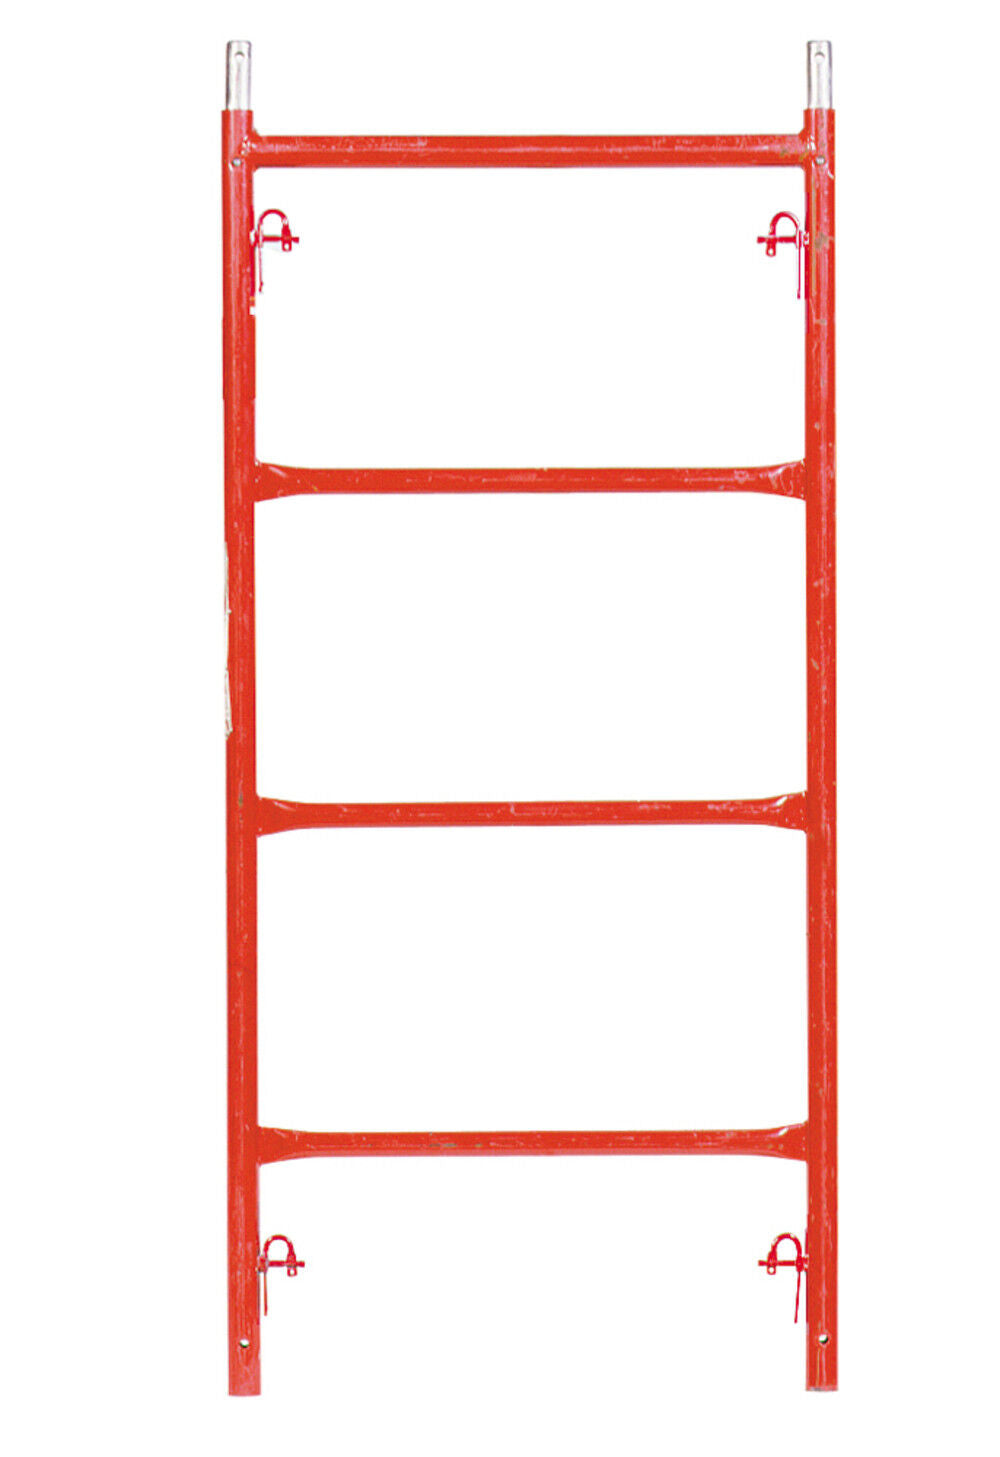 TOOLS 5 Ft. x 29 In. Narrow Scaffold Frame NF5B